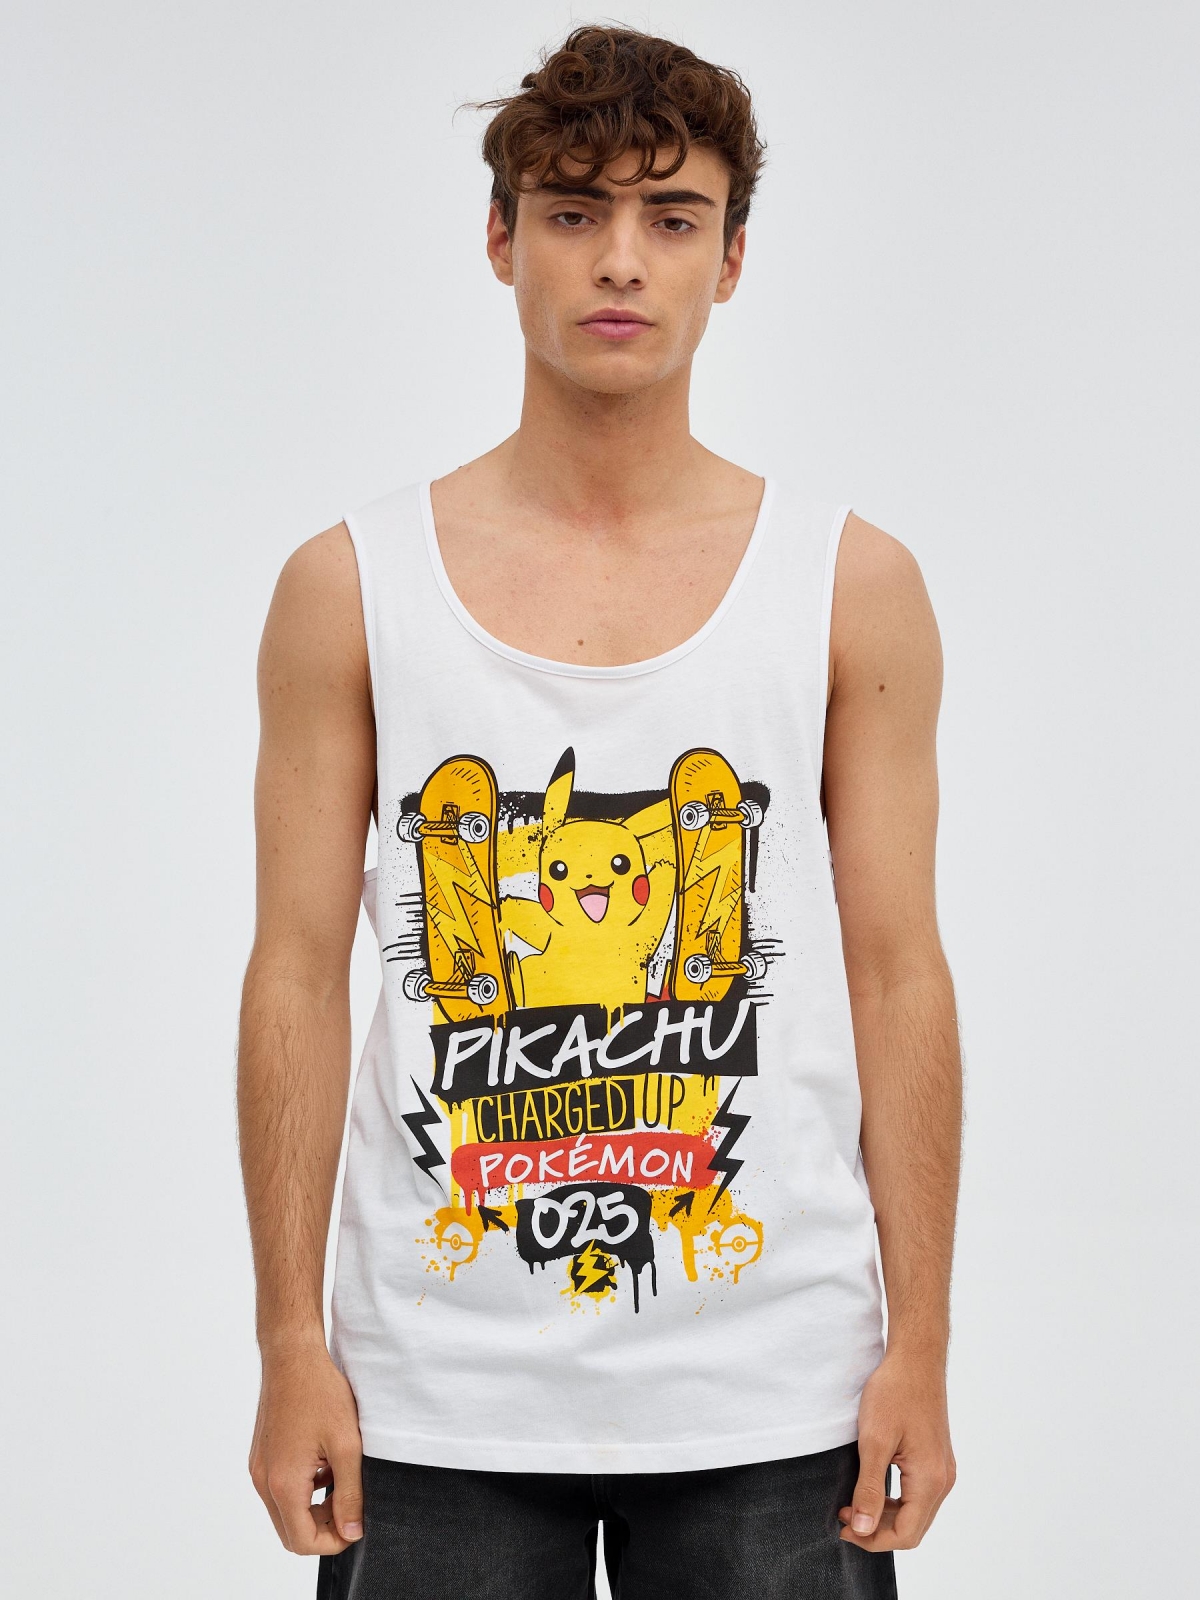 Pikachu tank top white middle front view